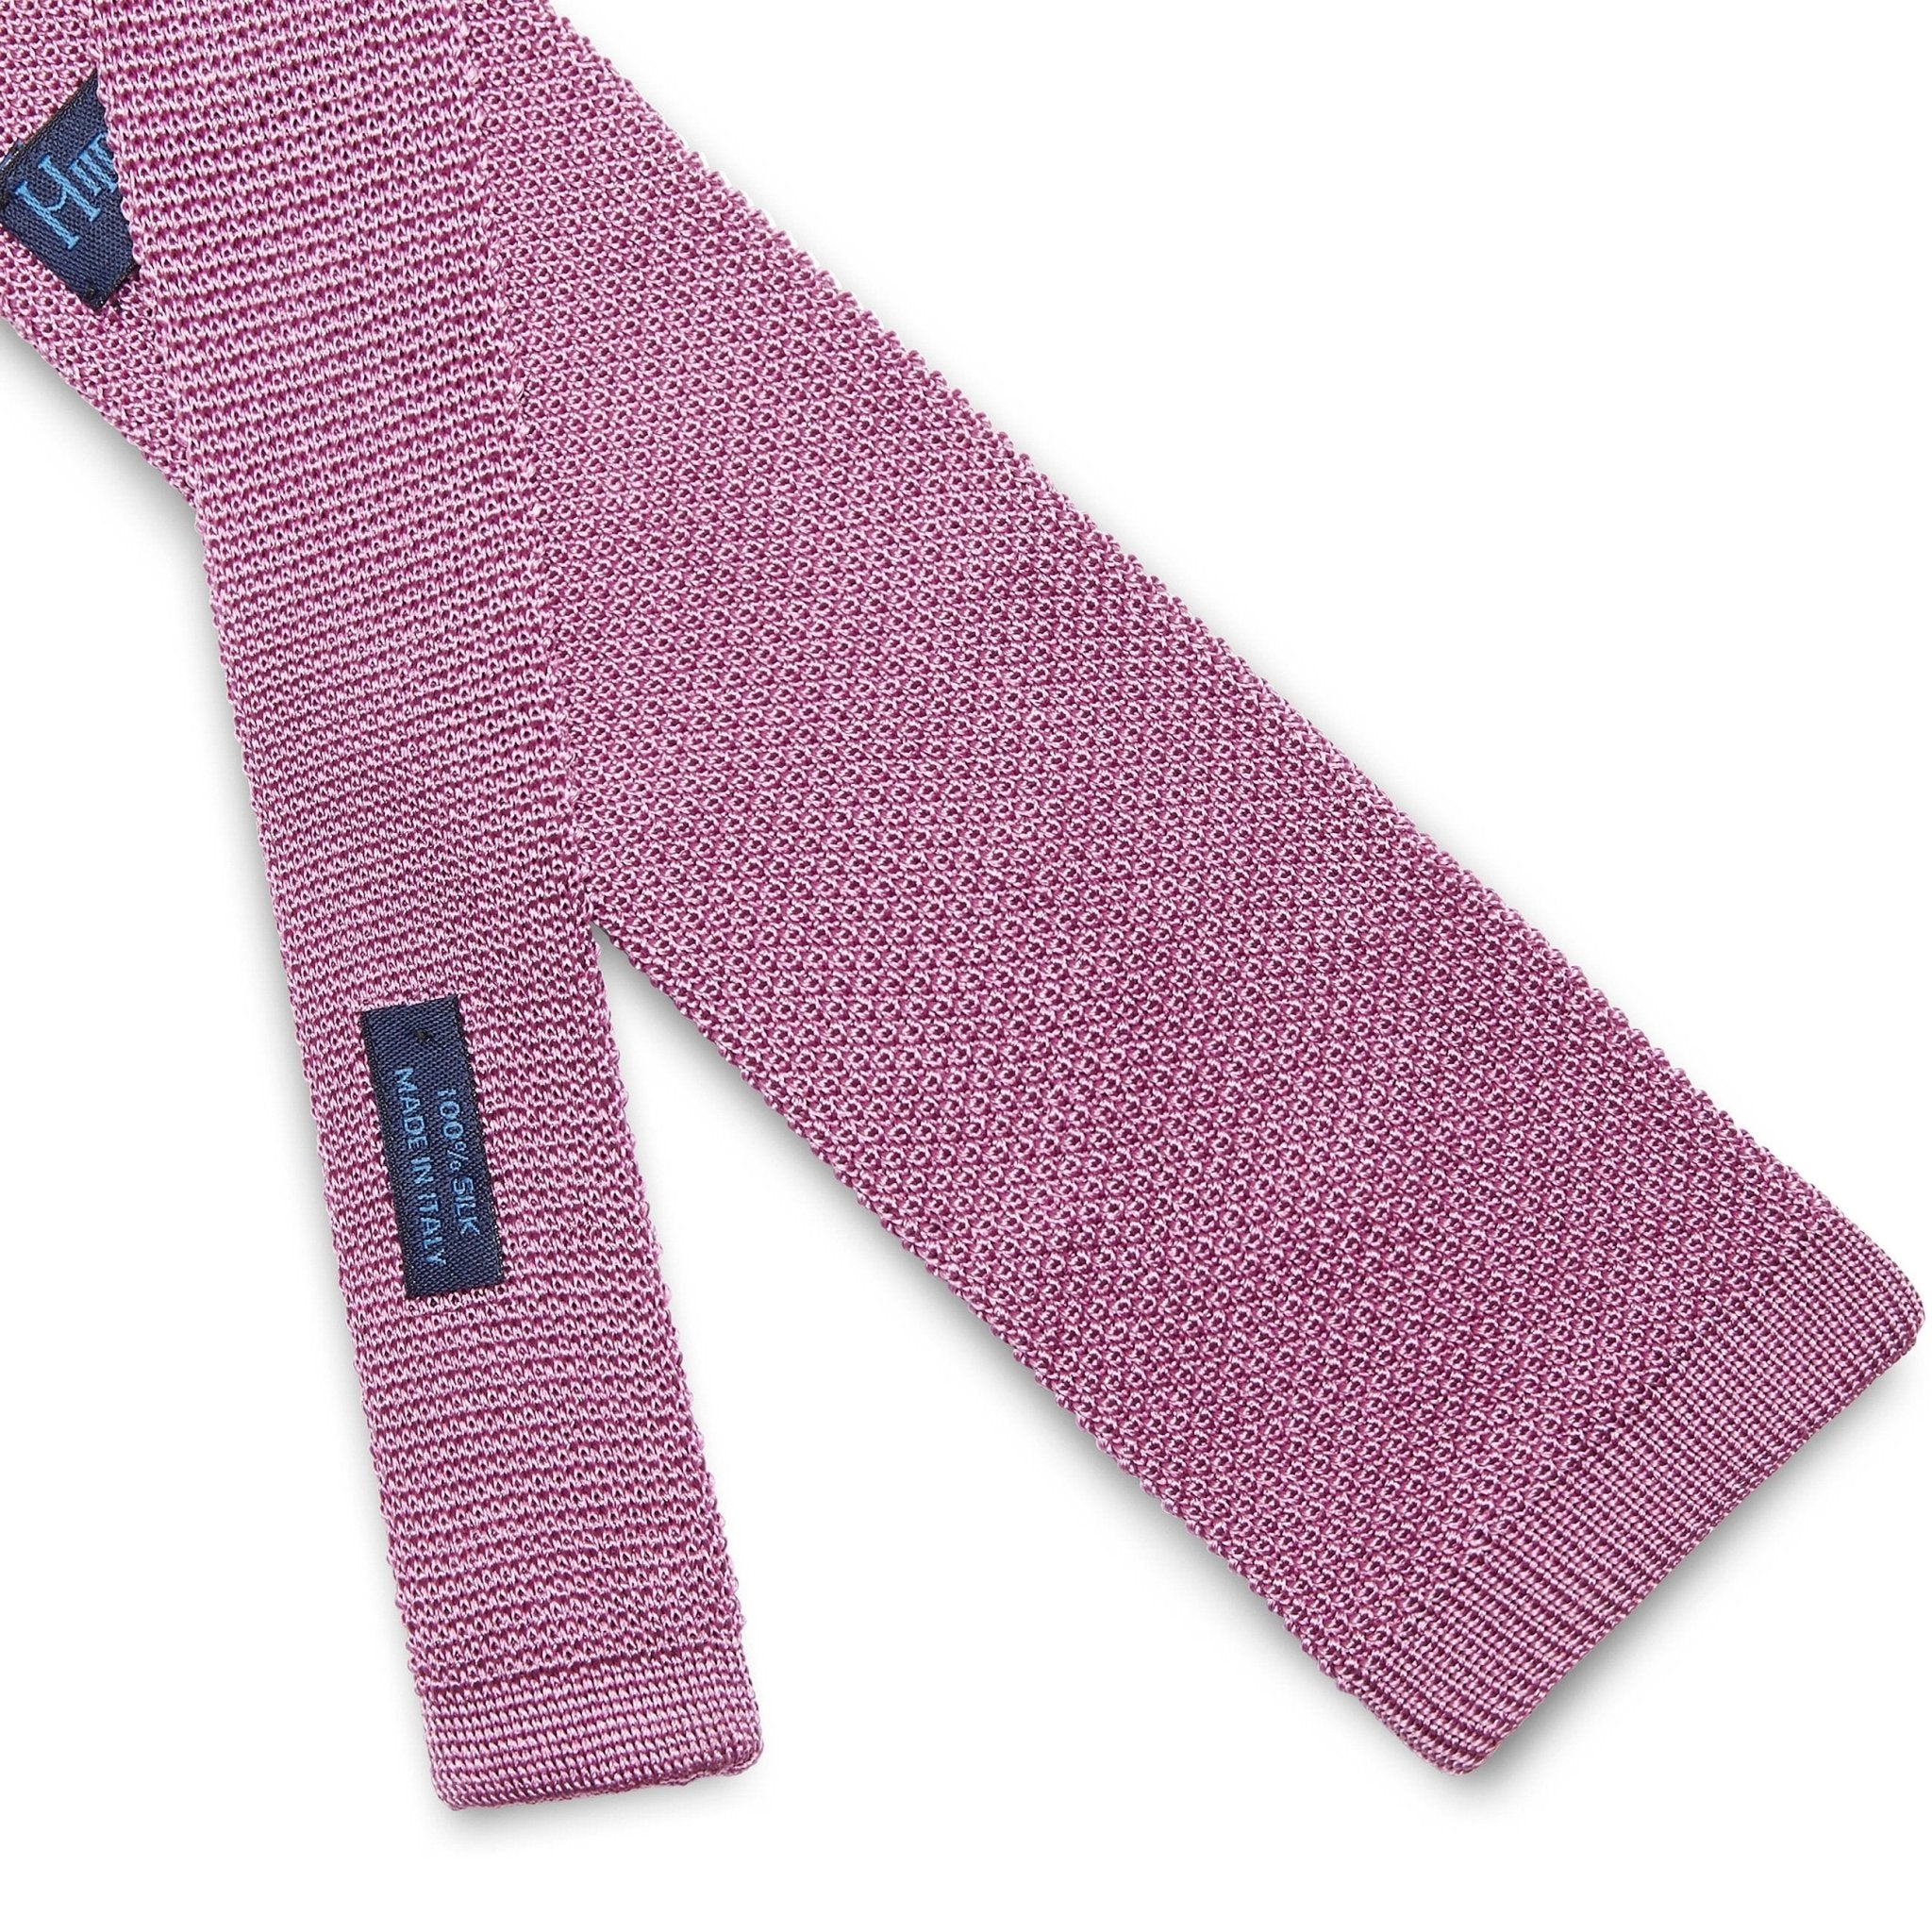 Rose Pink Knitted Silk Tie with White Spots